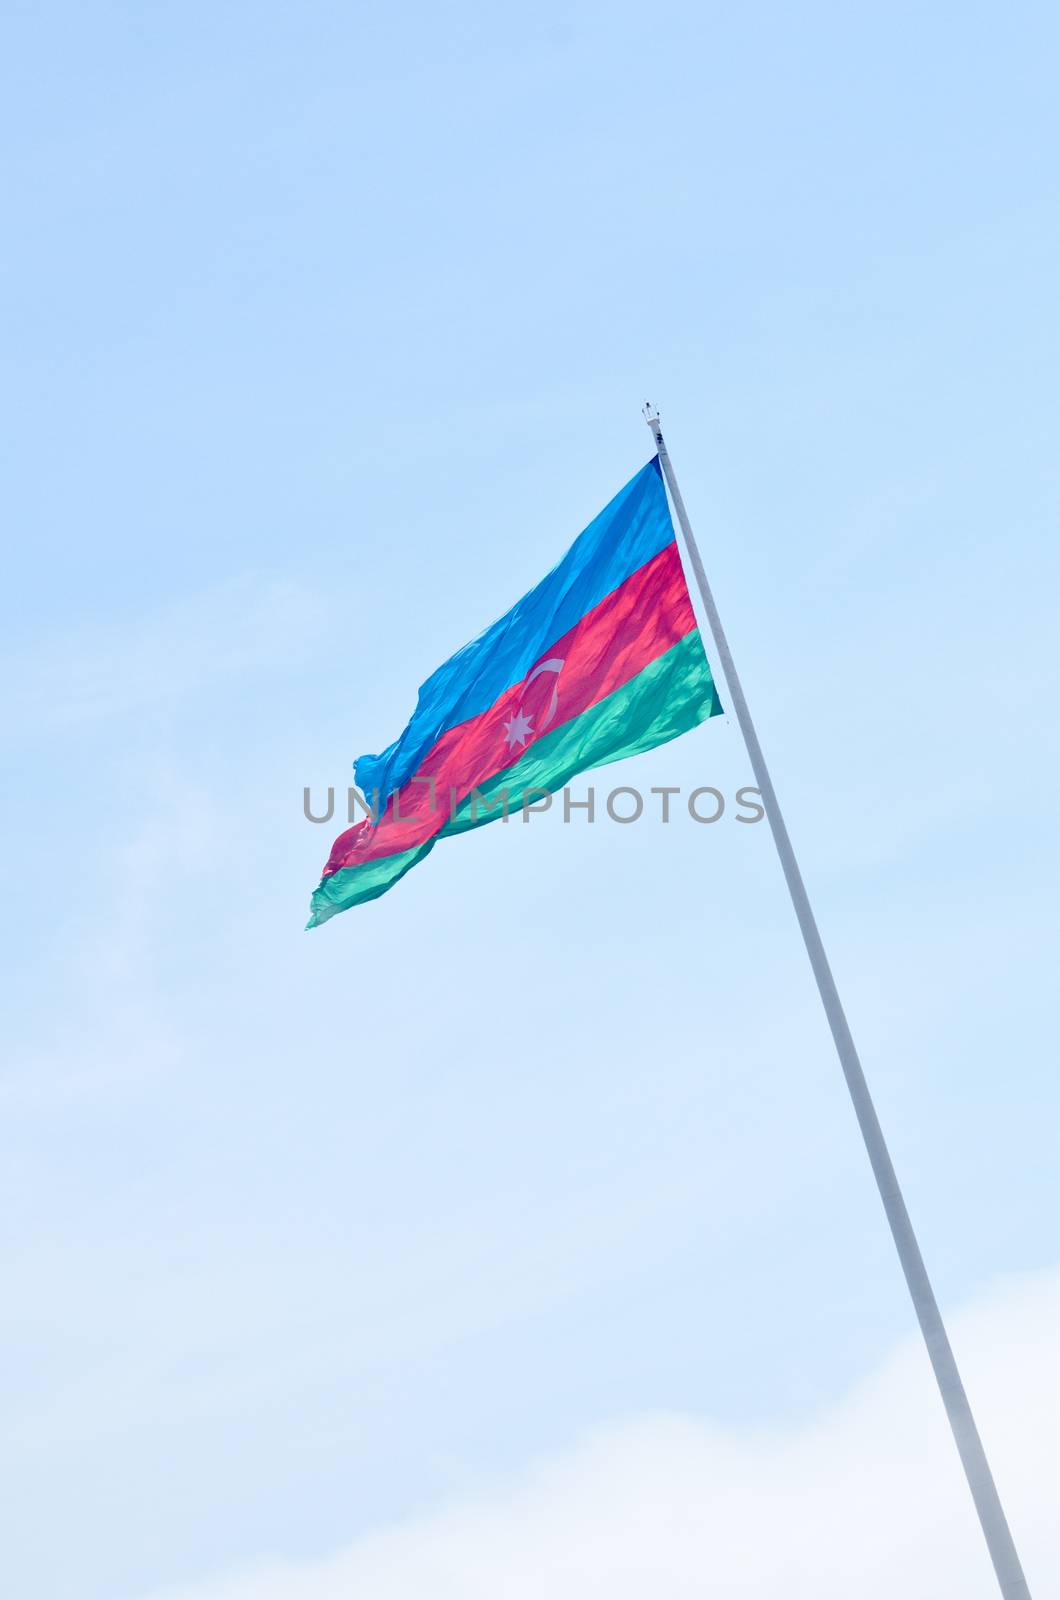 The flag was approved on November 9,1918 as the national flag of the Azerbaijan Democratic Republic,which existed until 1920.On February 5,1991,the flag was approved as the national flag of the Republic of Azerbaijan,which proclaimed its independence in the same year.